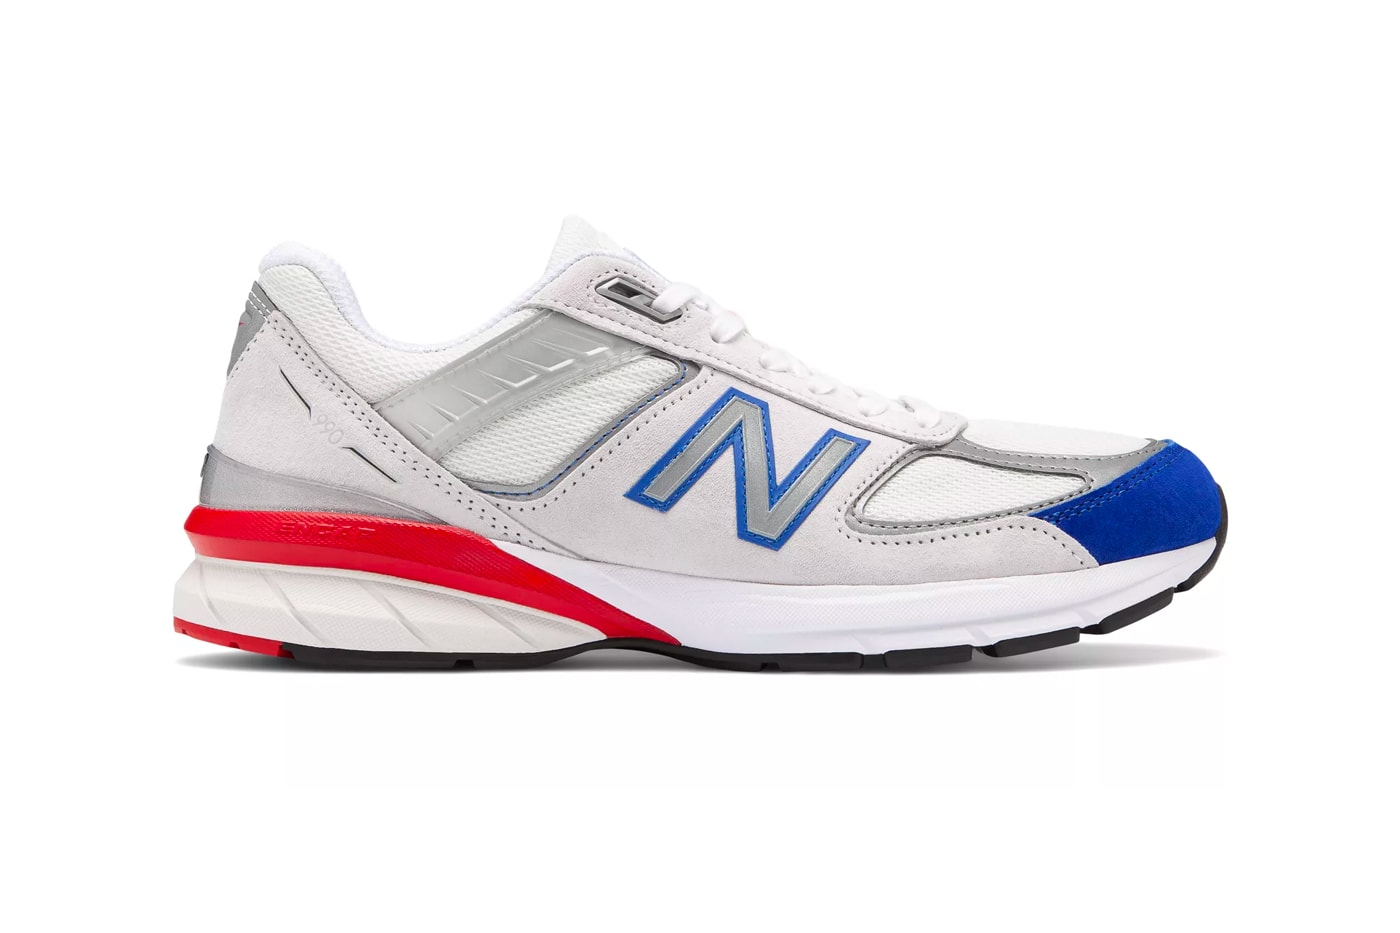 New Balance 990v5 Team Royal Team Red Release made in united states of america US red blue white flag fourth of july independence day 